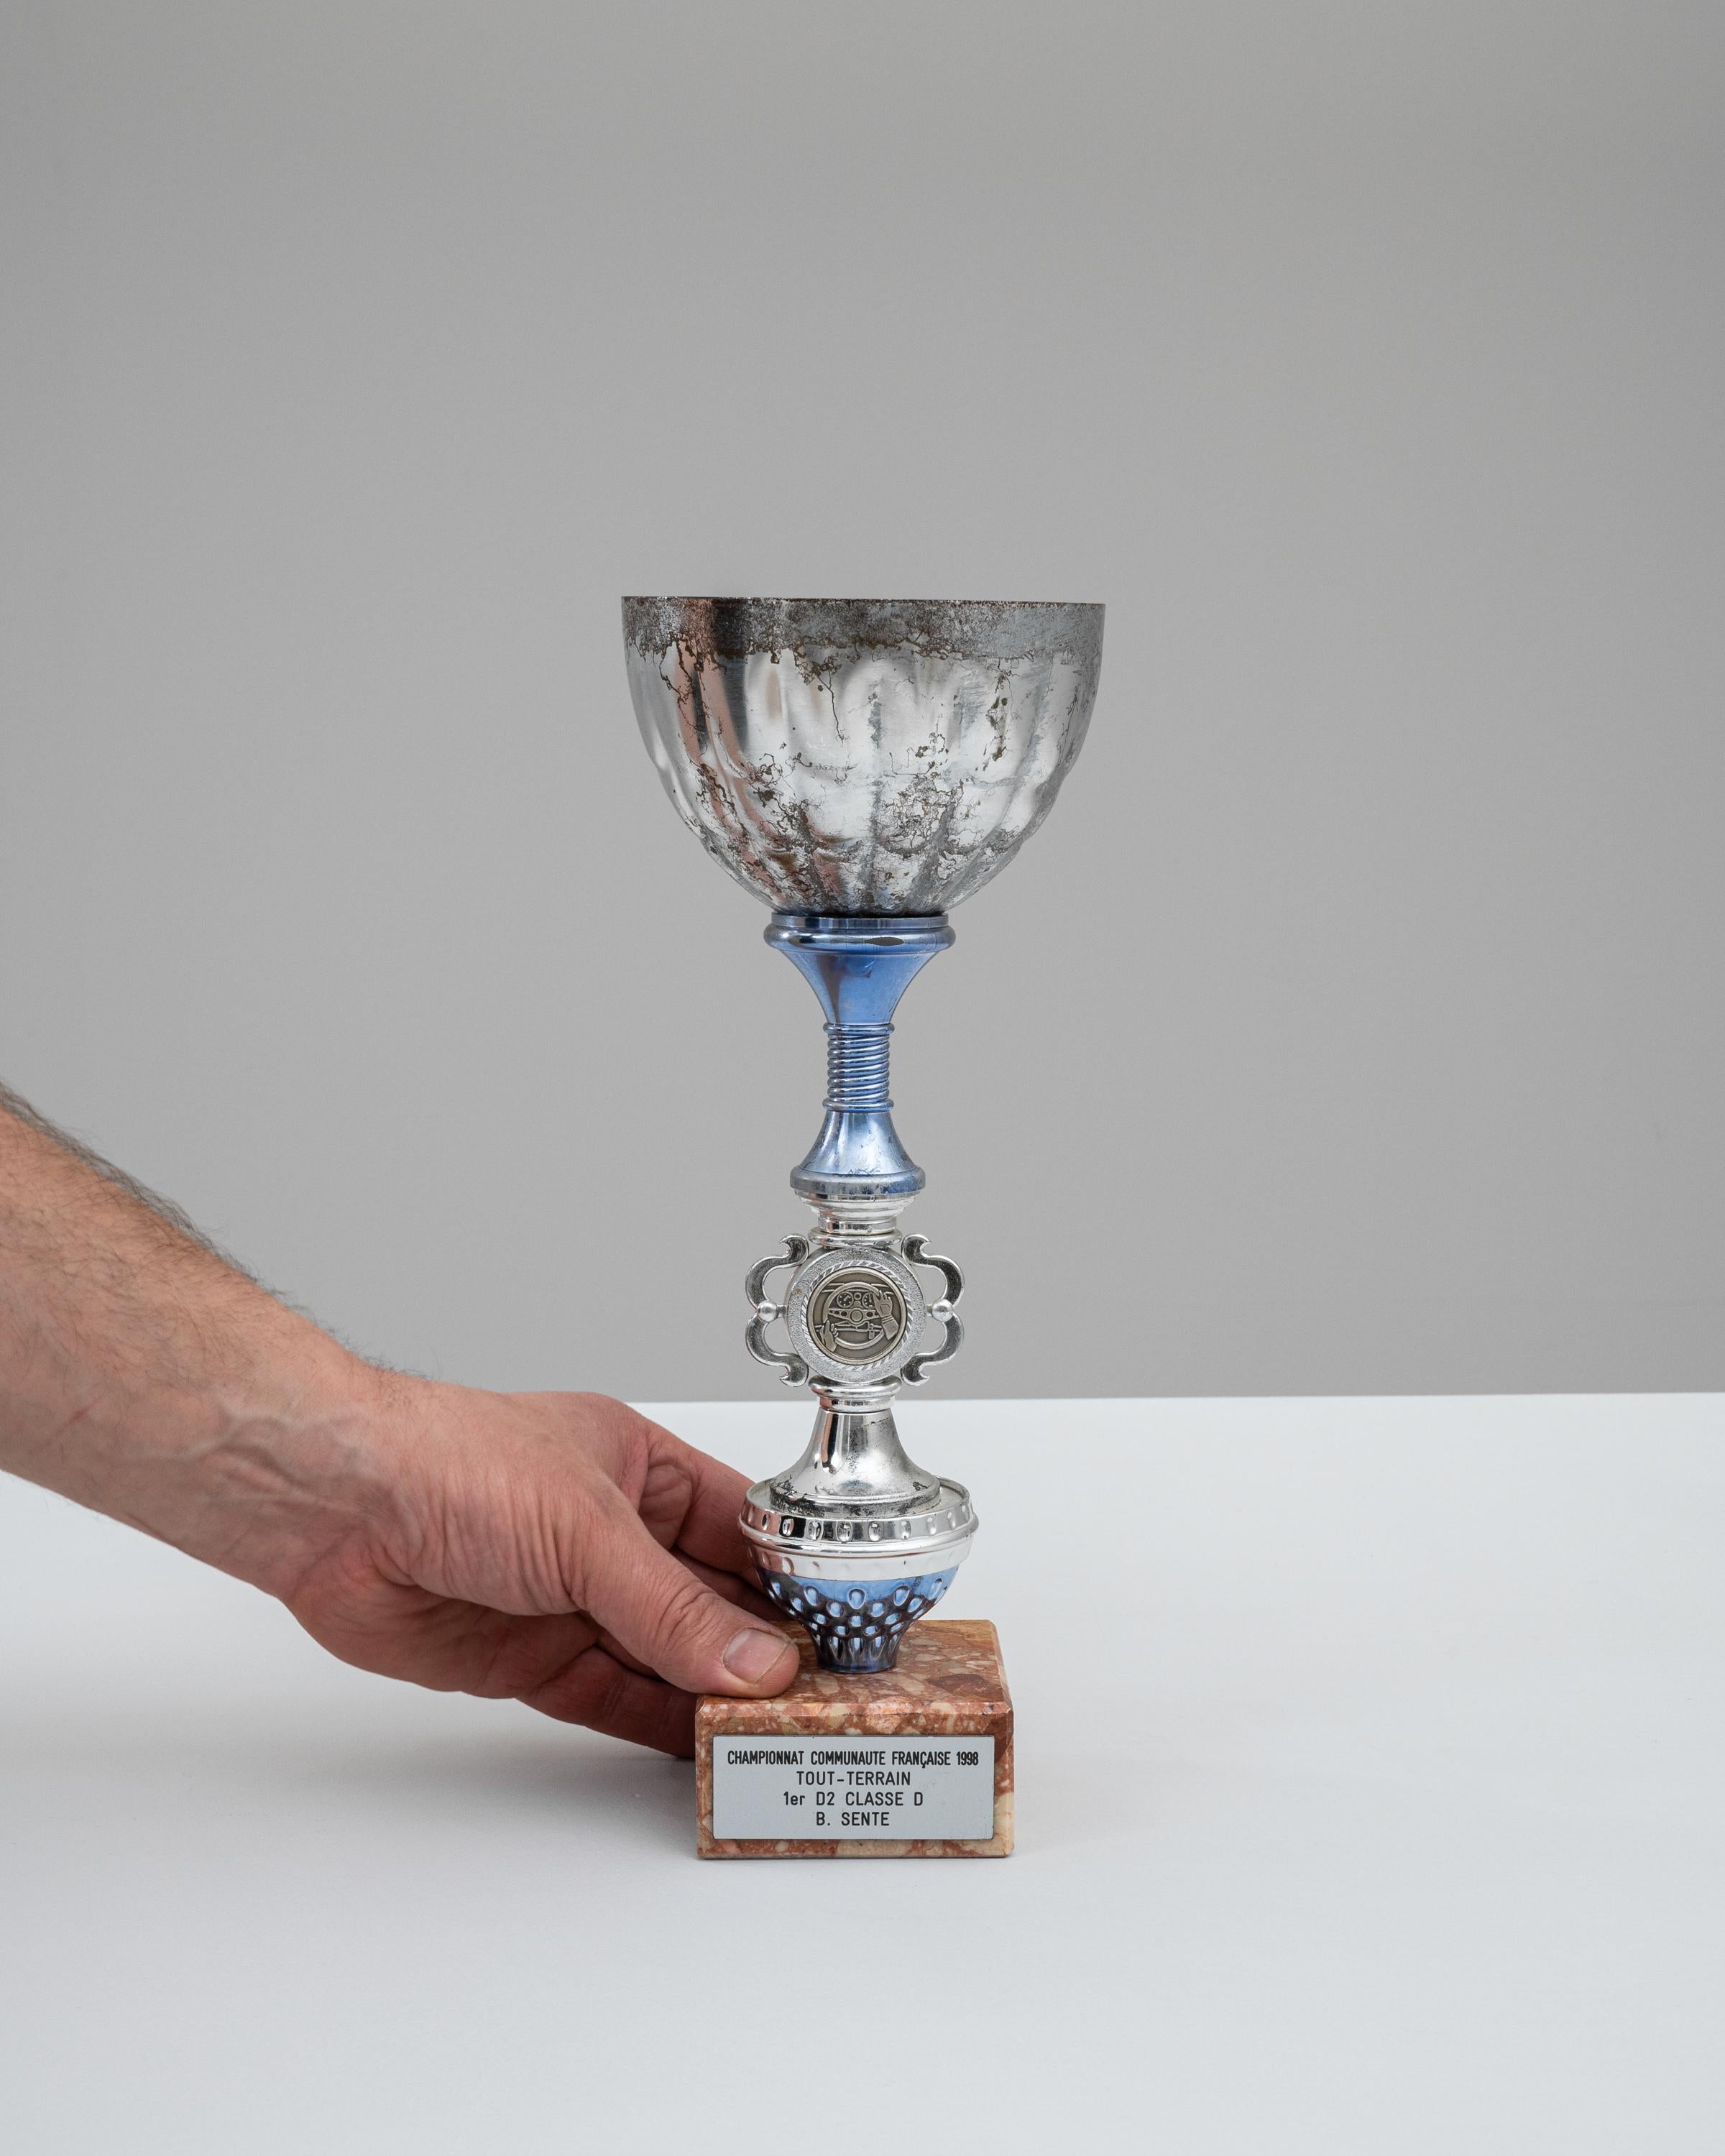 This 1990s Belgian Metal & Marble Goblet is an emblematic tribute to the triumphs of off-road racing, marking a victorious moment in the 1998 Tout-Terrain championship. The goblet itself is crafted with a classic silhouette, featuring a cup of aged